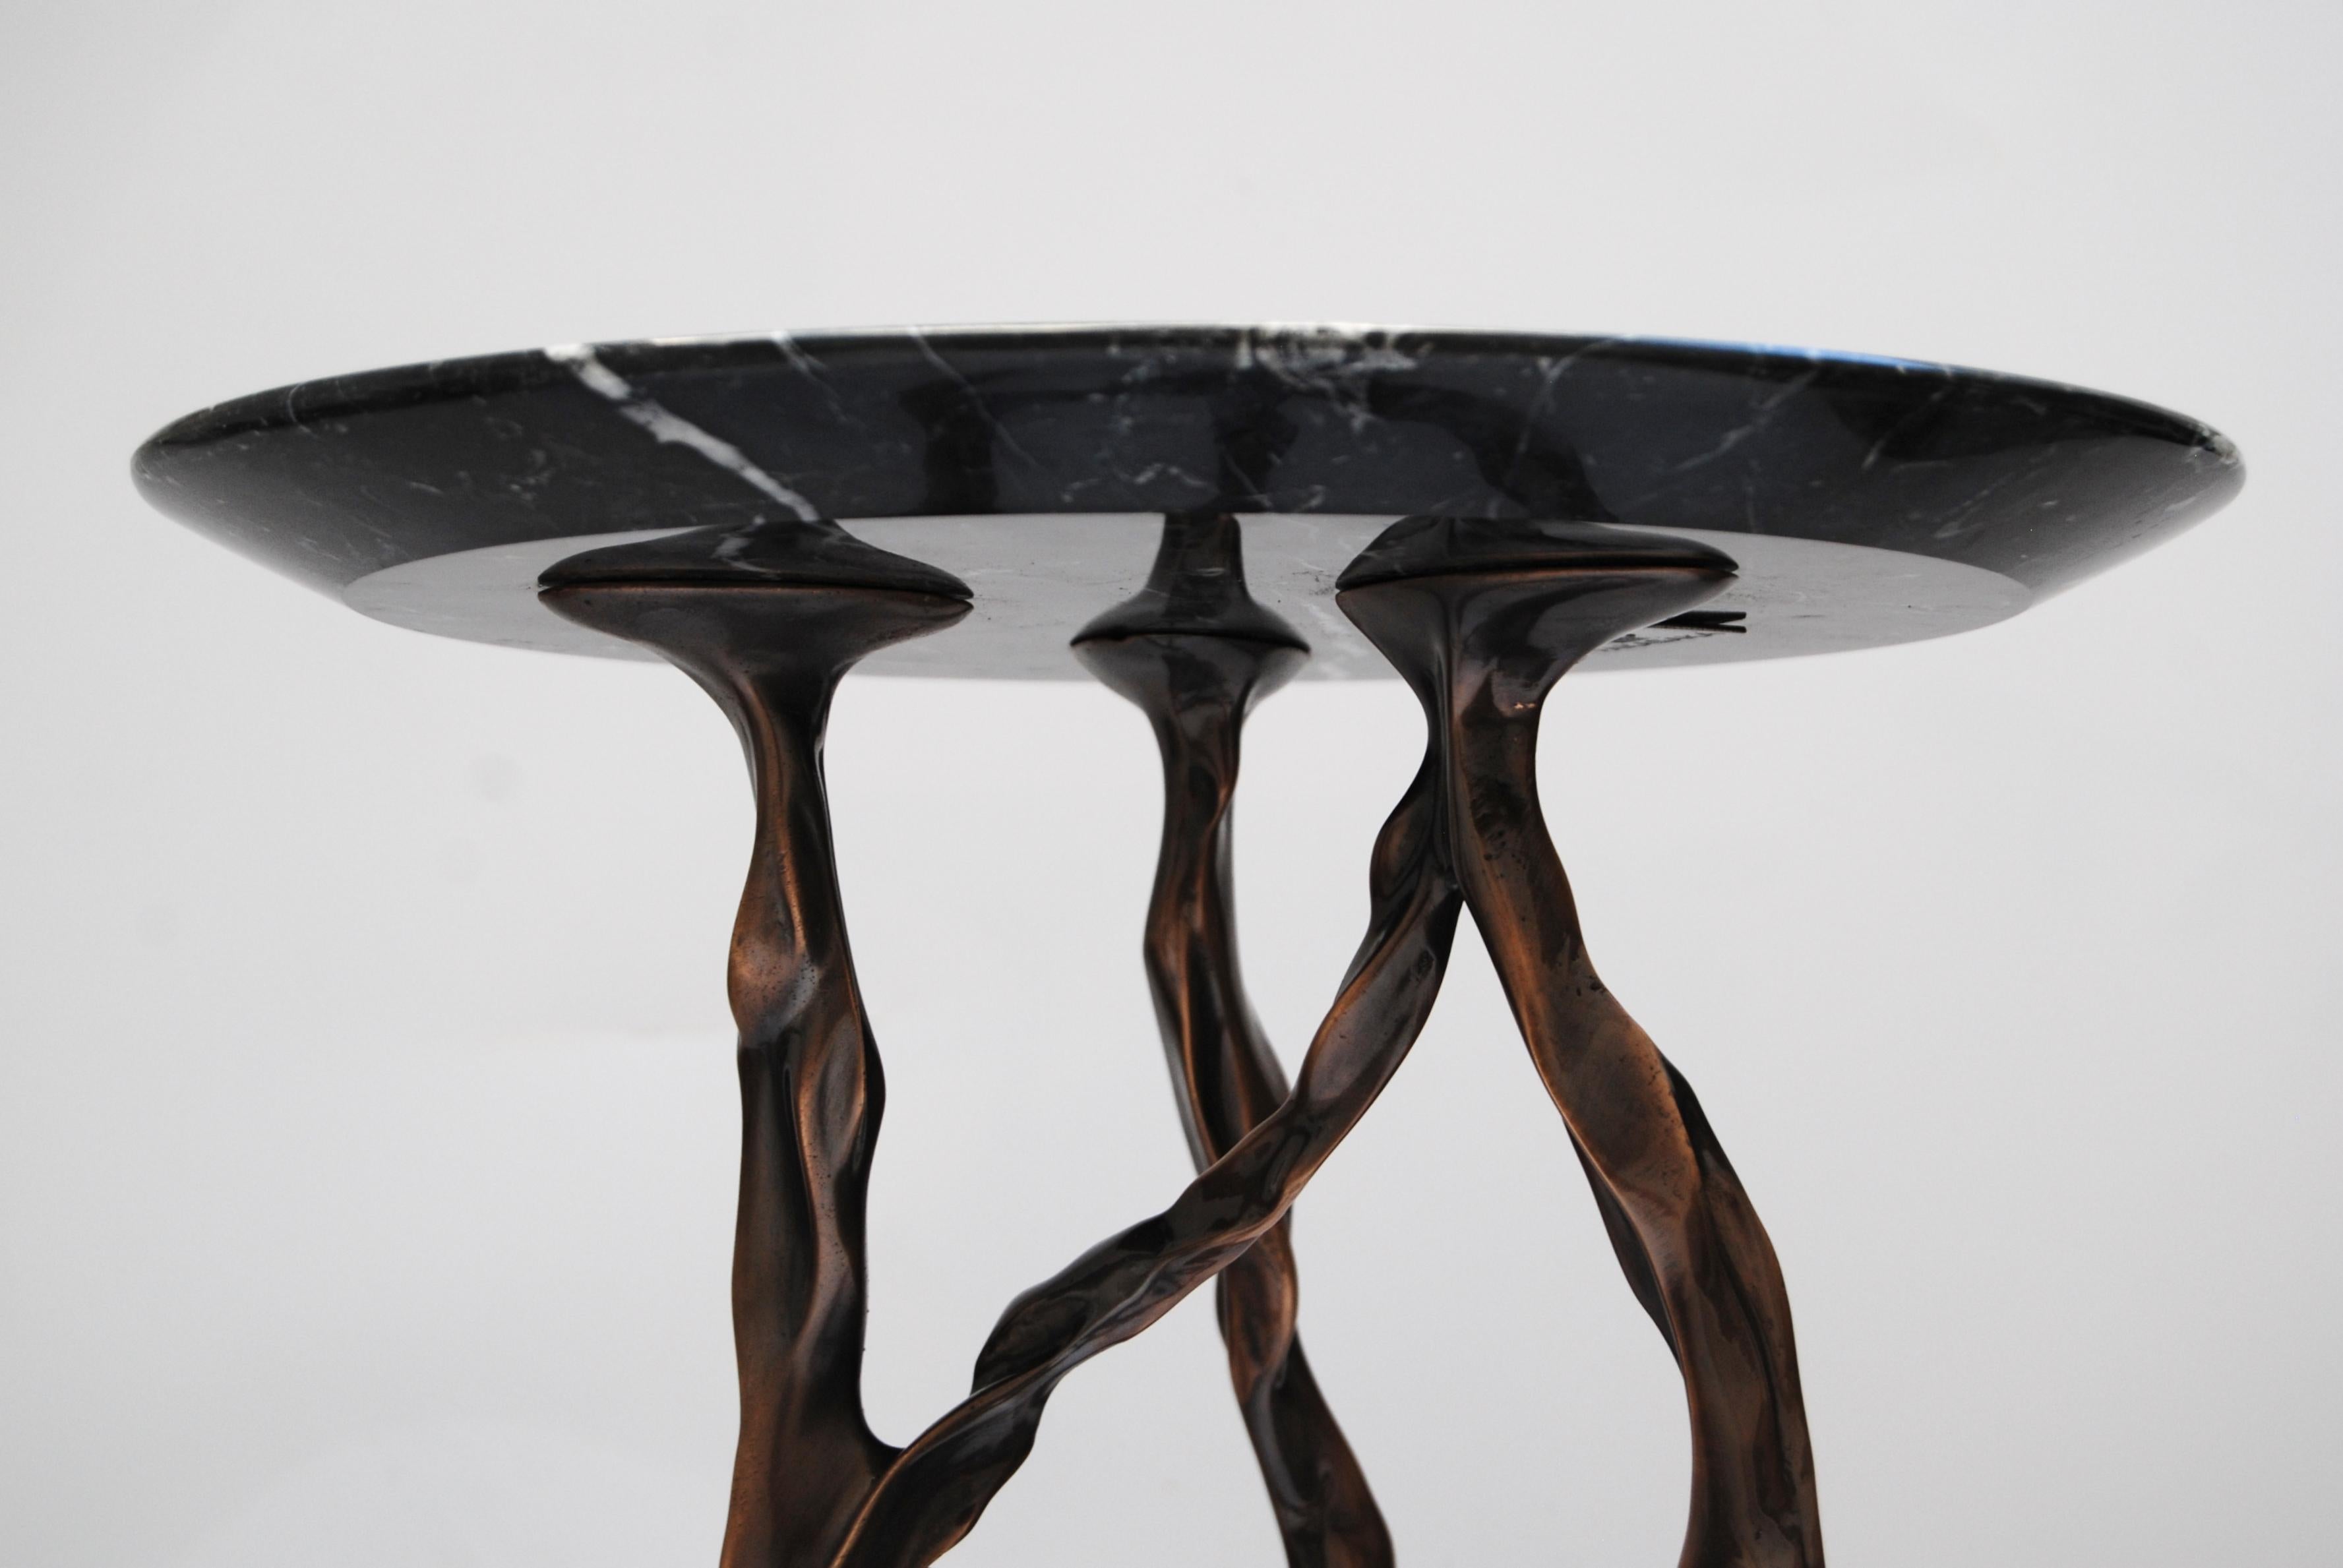 Contemporary Pair of Side Tables with Marquina Marble Top by Fakasaka Design